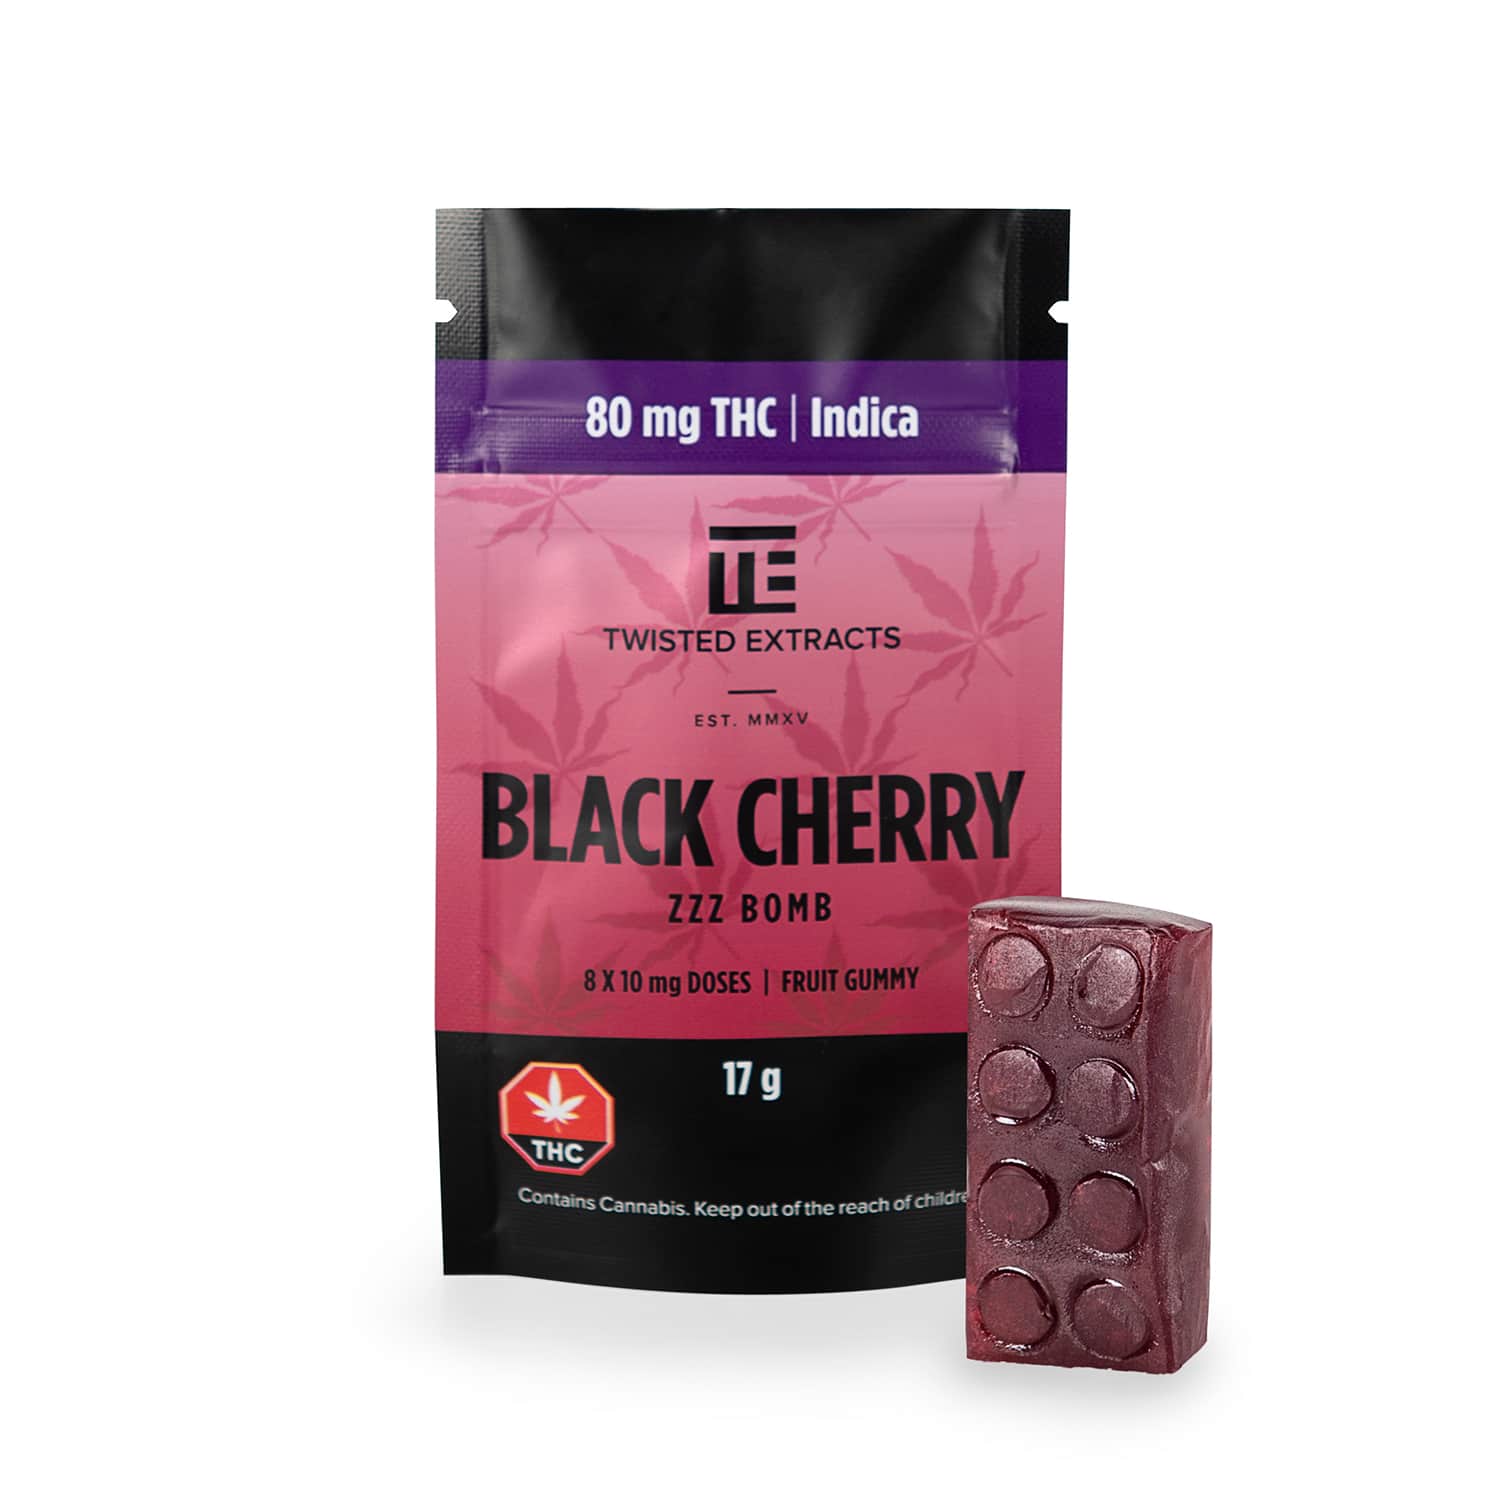 Twisted-extracts-blackcherry-ganjawest-1.jpg